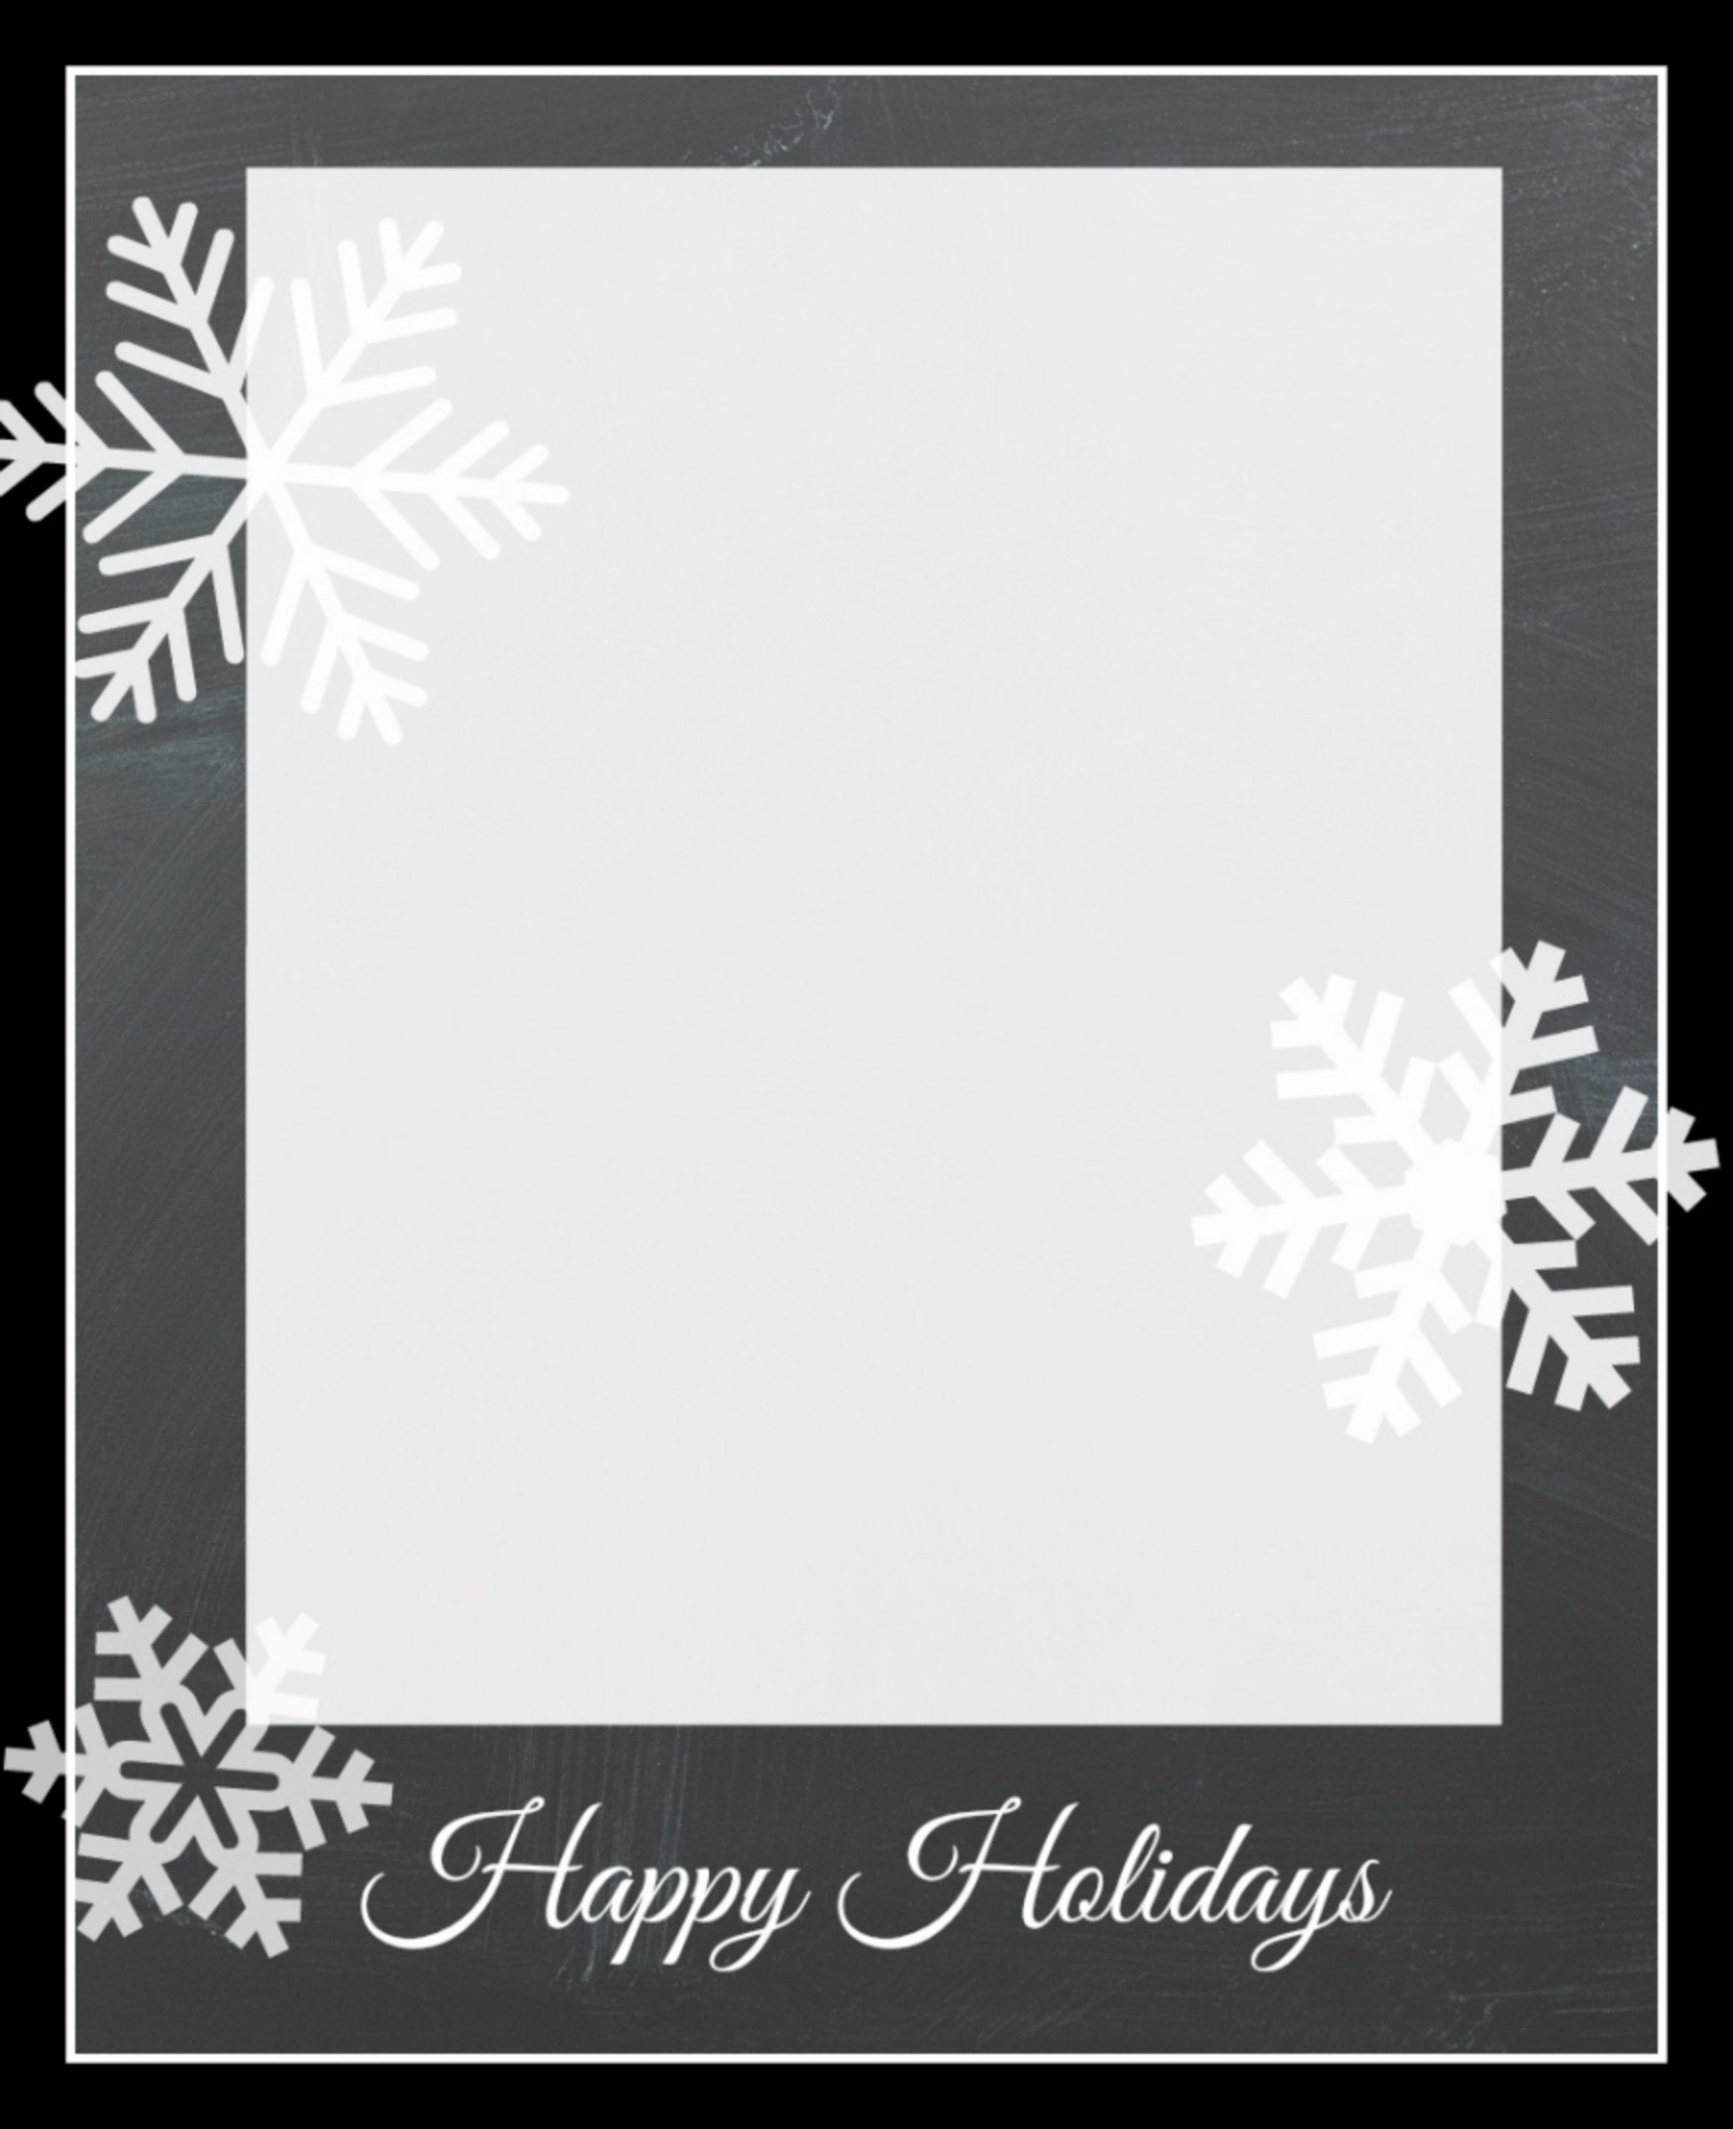 Free Christmas Card Templates – Crazy Little Projects With Free Downloadable Postcard Templates